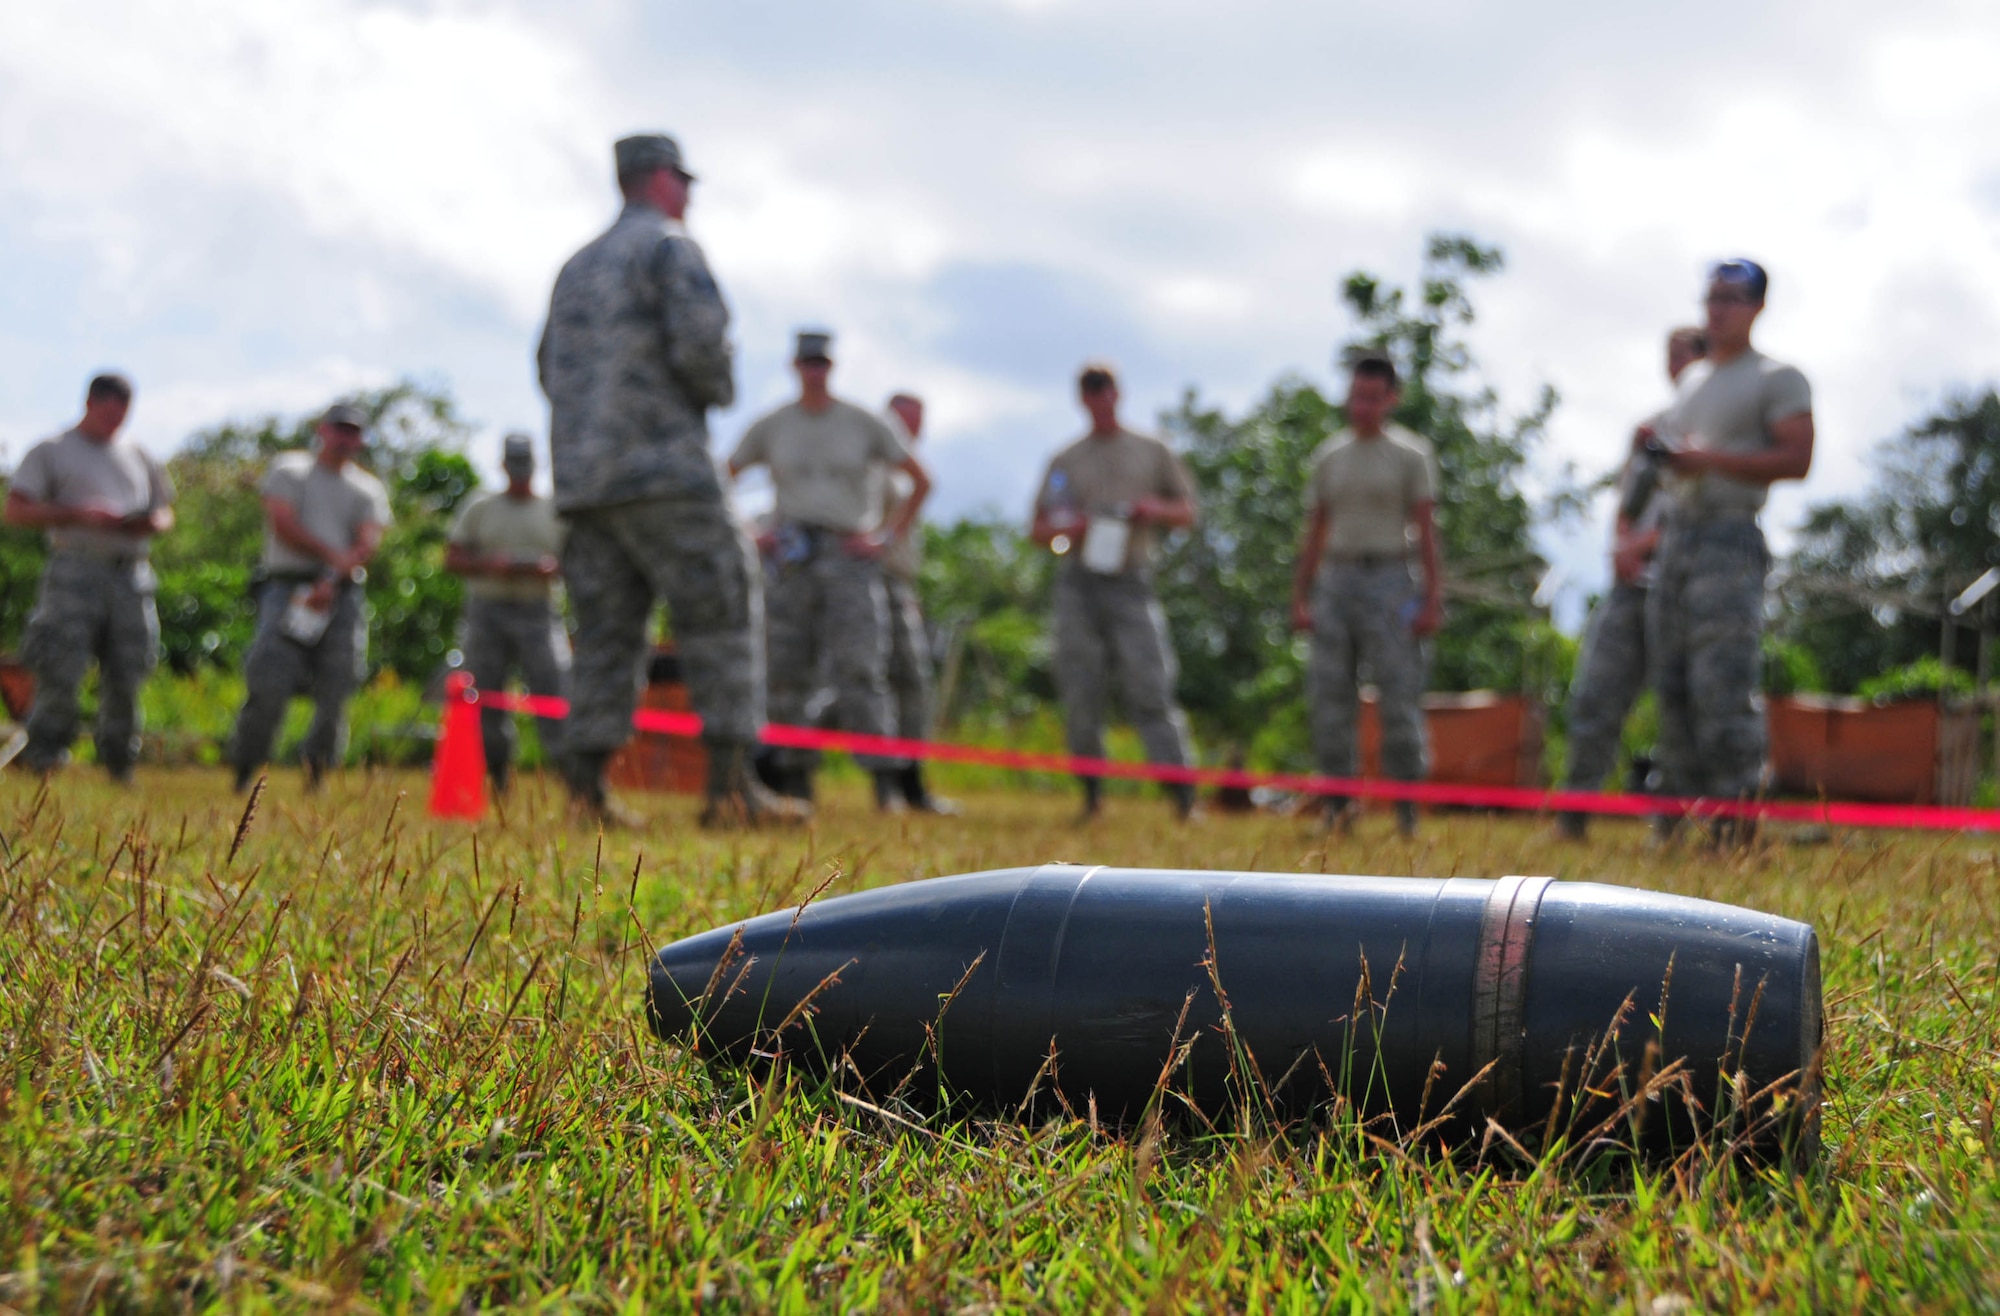 An unexploded ordnance is used to demonstrate proper procedures for conducting post-attack reconnaissance during chemical warfare PAR training at Andersen Air Force Base, Guam, Jan. 28, 2013. The 36th Civil Engineer Squadron readiness and emergency management flight conducts chemical, biological, radiological, nuclear and high-yield explosives training in order to ensure that Airmen are ready to respond and continue operations in hazardous environments. (U.S. Air Force photo/Airman 1st Class Marianique Santos/Released)